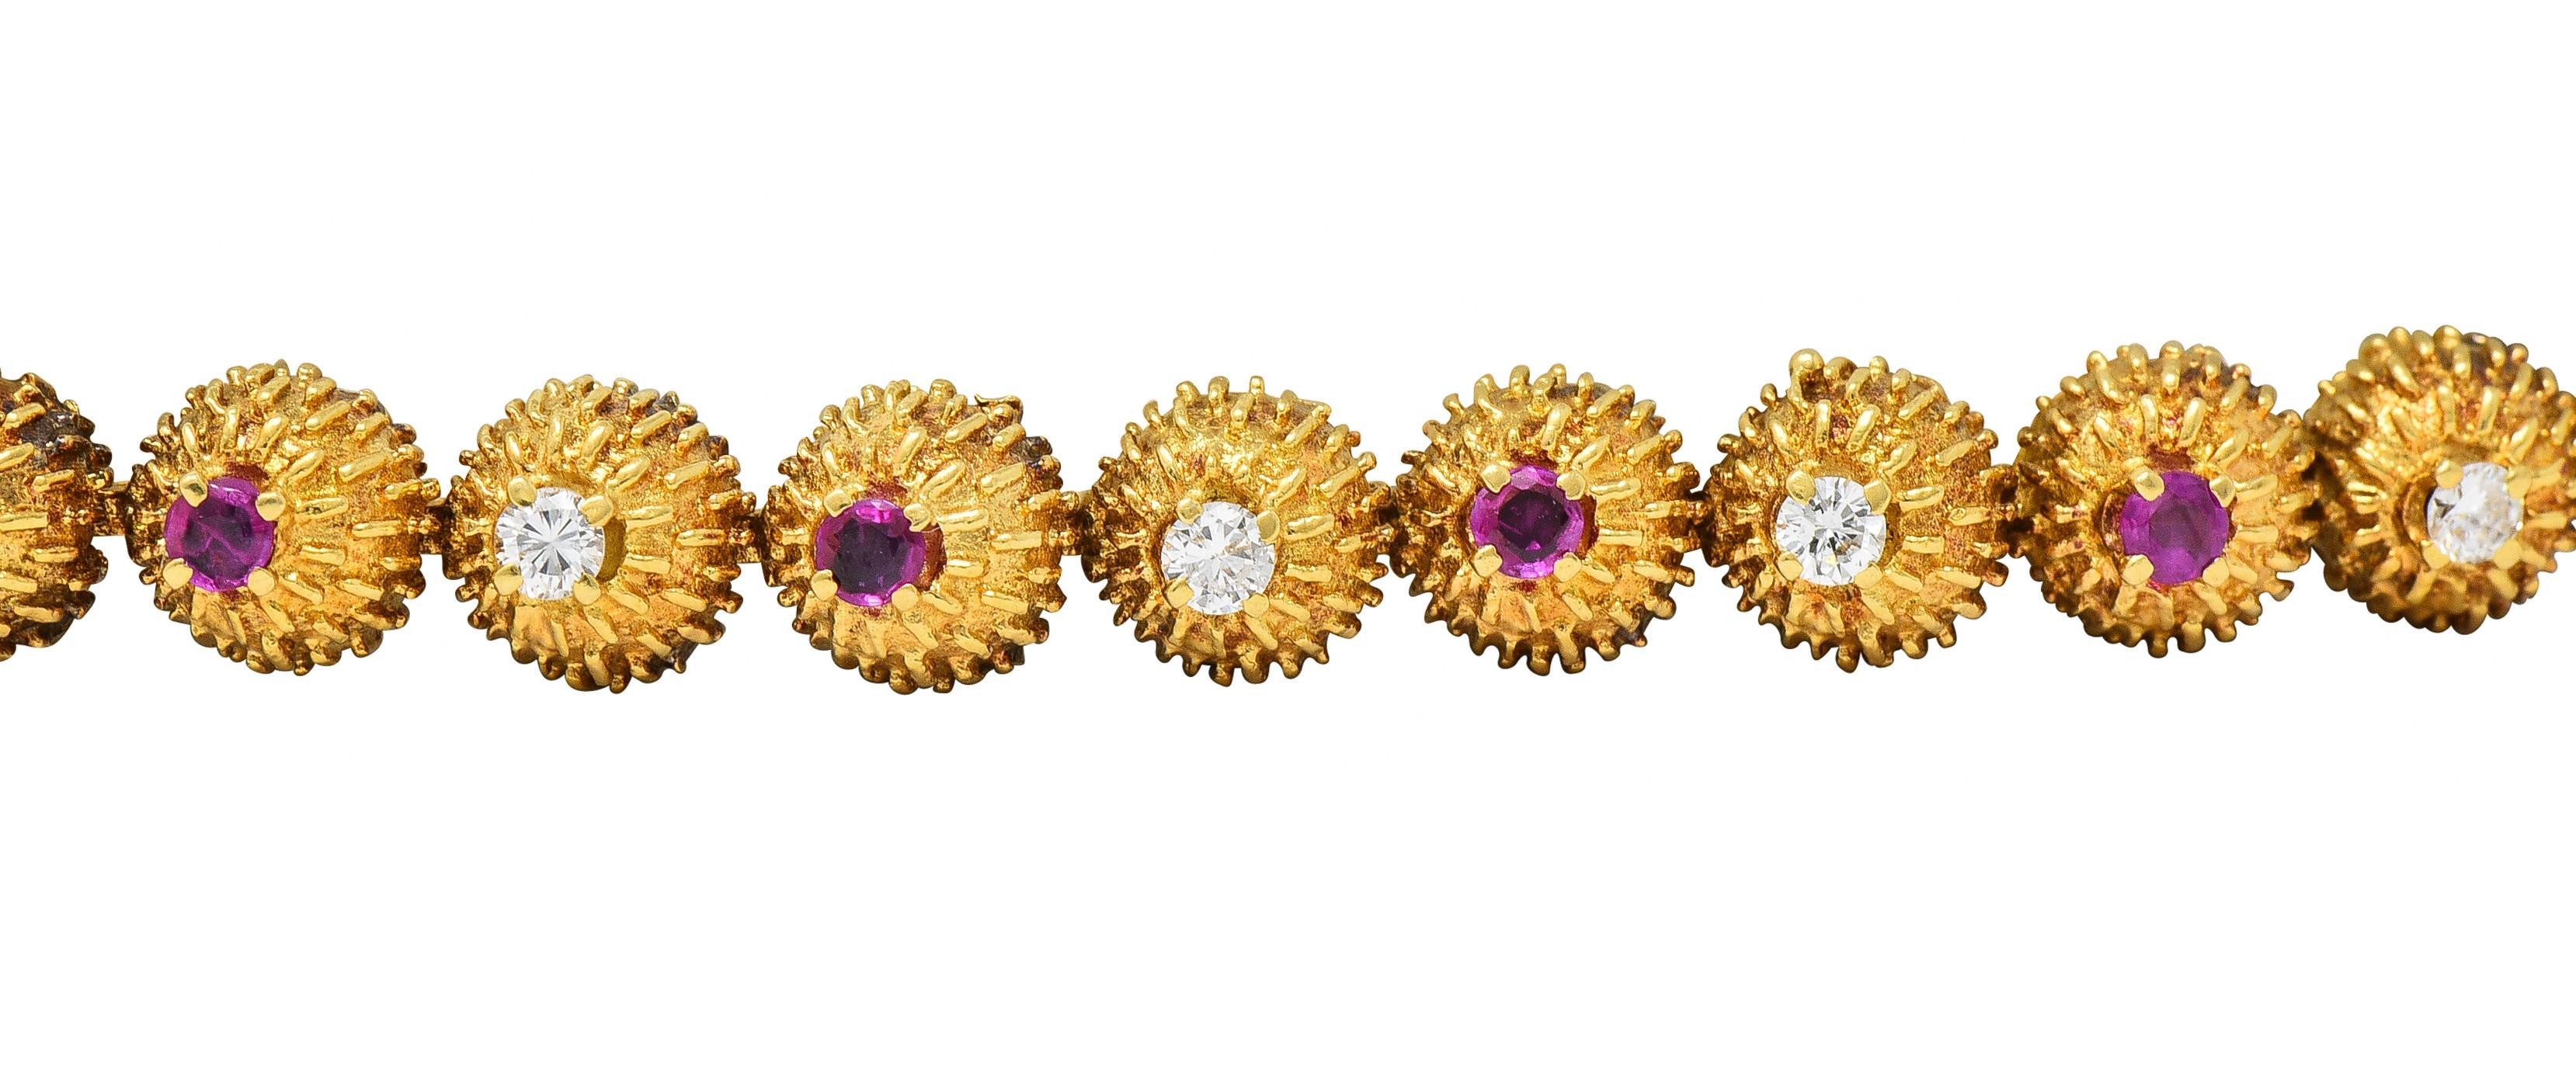 Tiffany & Co. Mid-Century Diamond Ruby 18 Karat Gold Vintage Cactus Bracelet In Excellent Condition For Sale In Philadelphia, PA